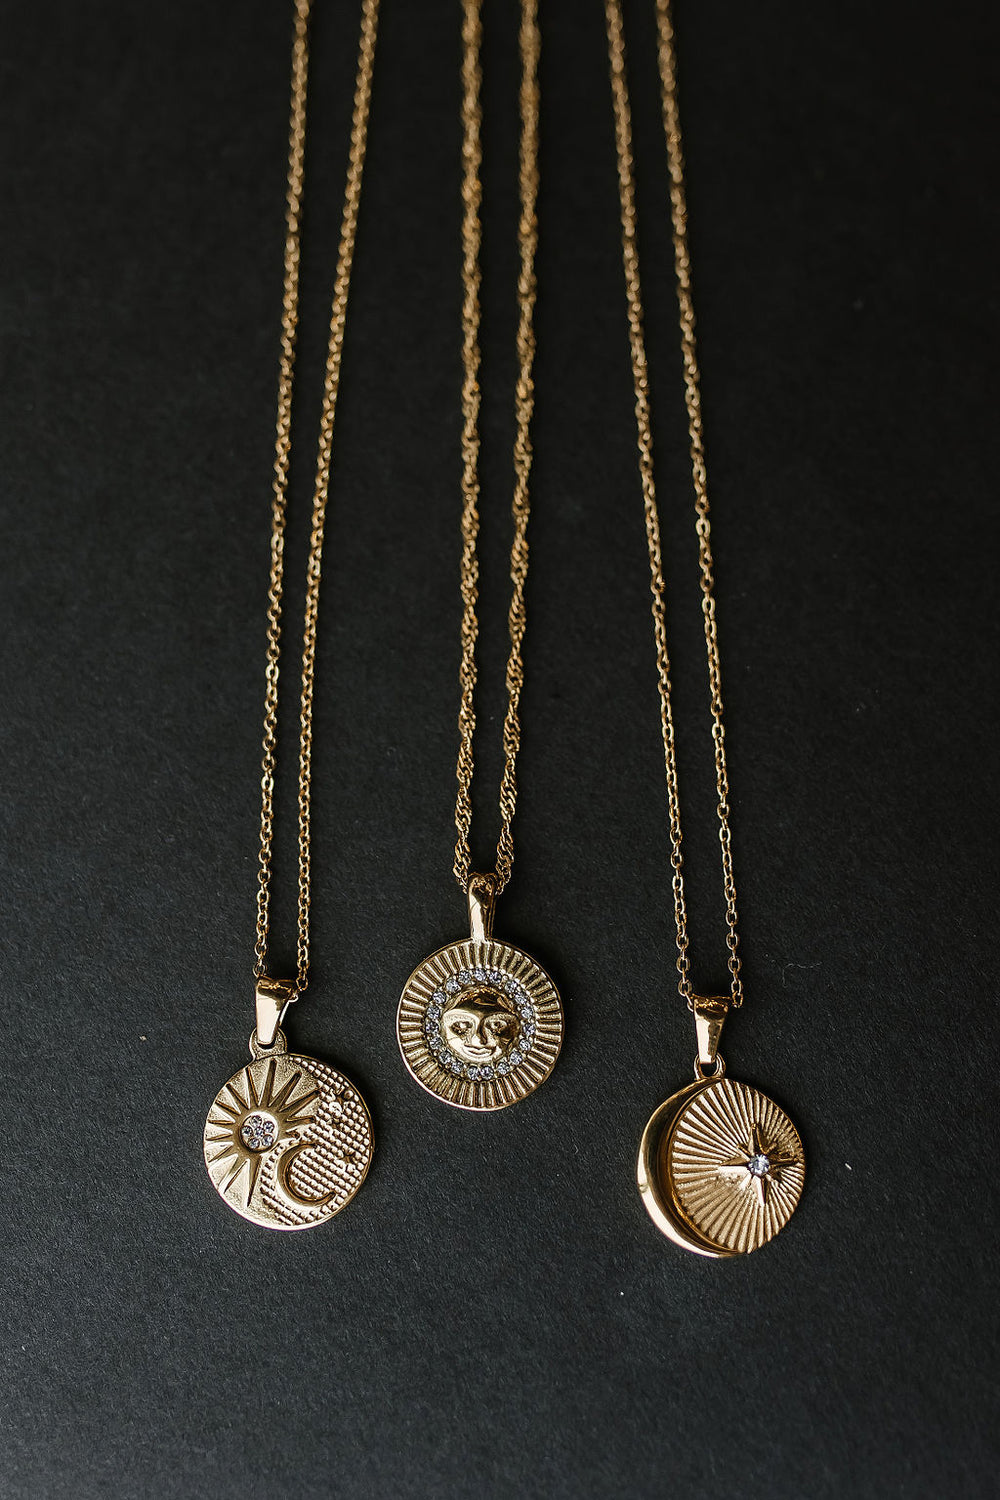 Coin-style Pendant Charm Necklace